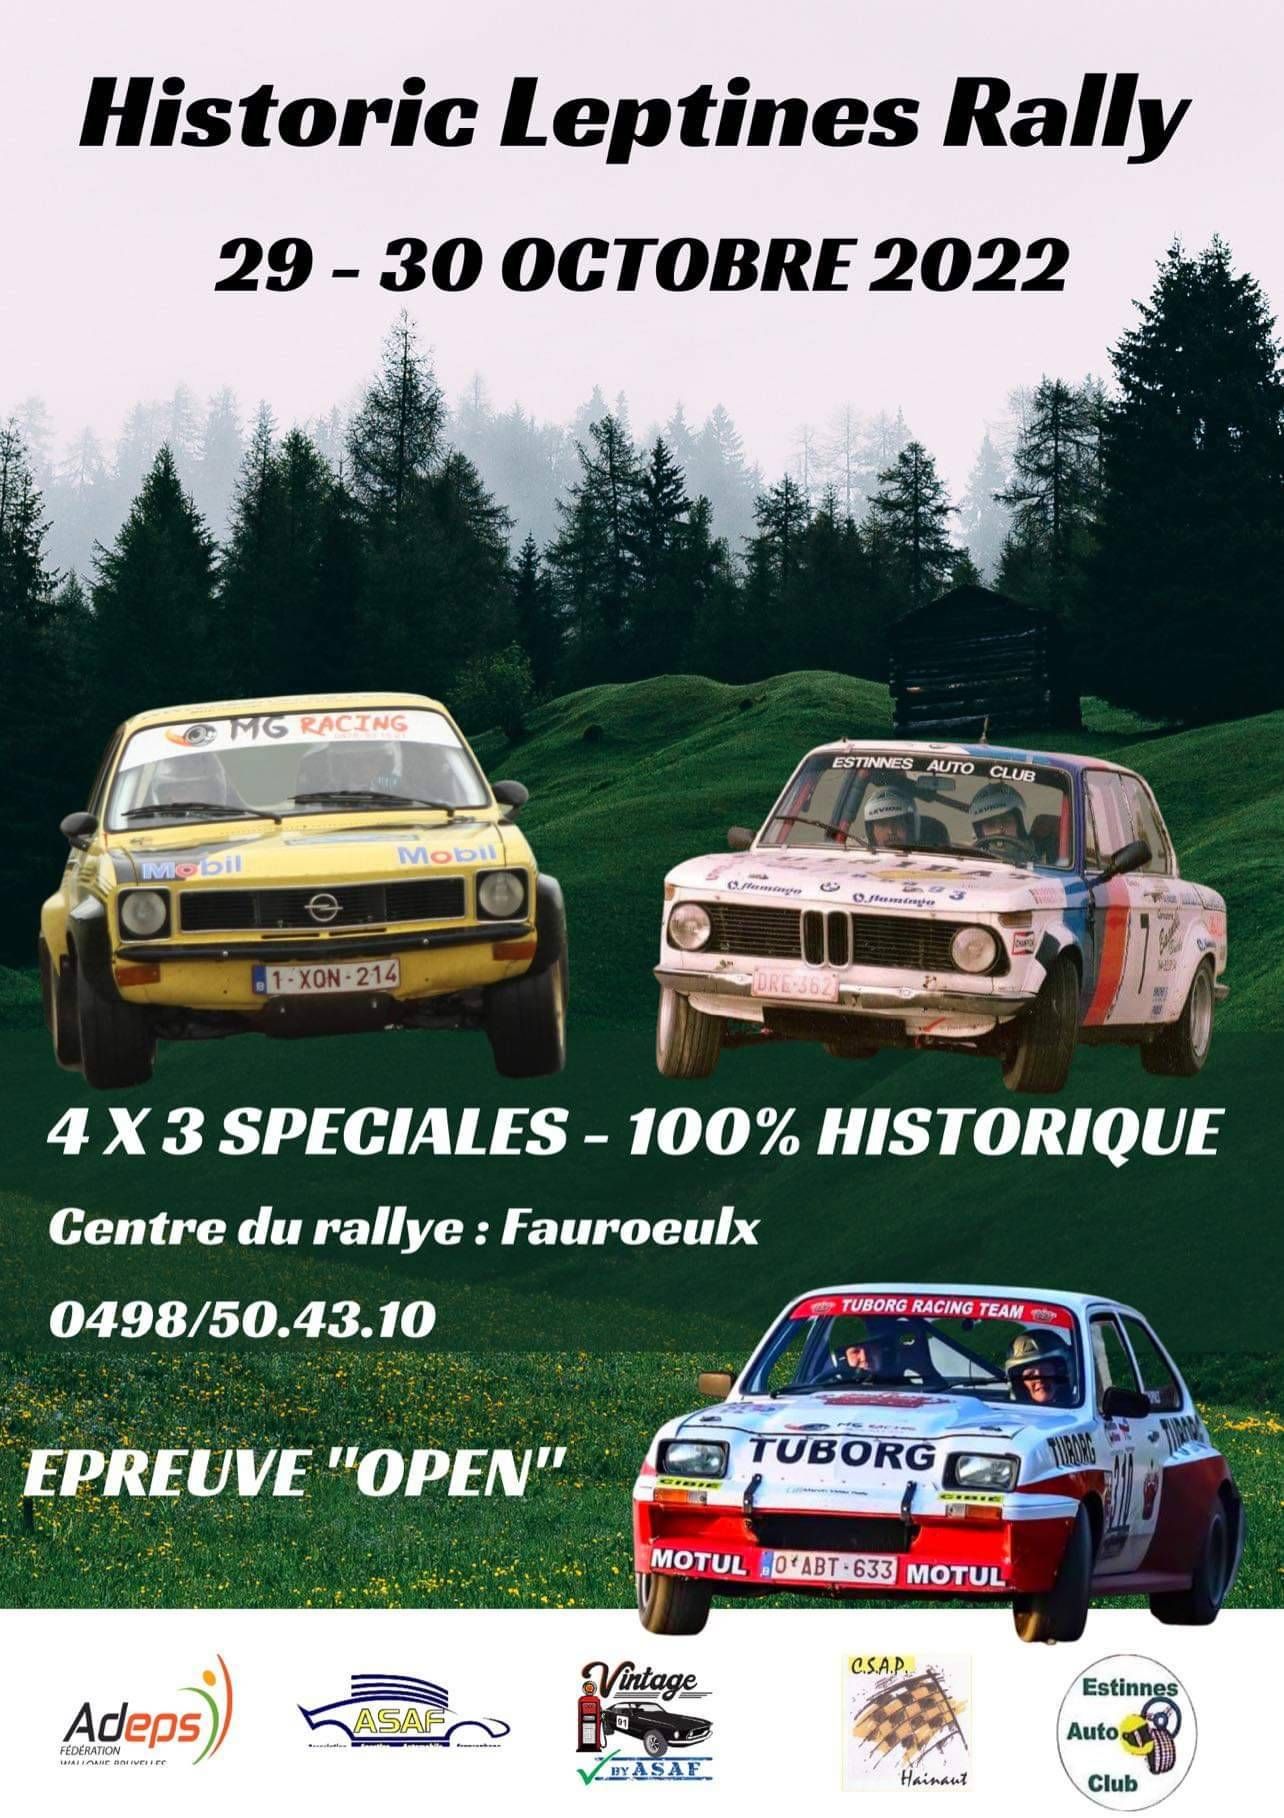 affiche deHistoric Leptines Rally